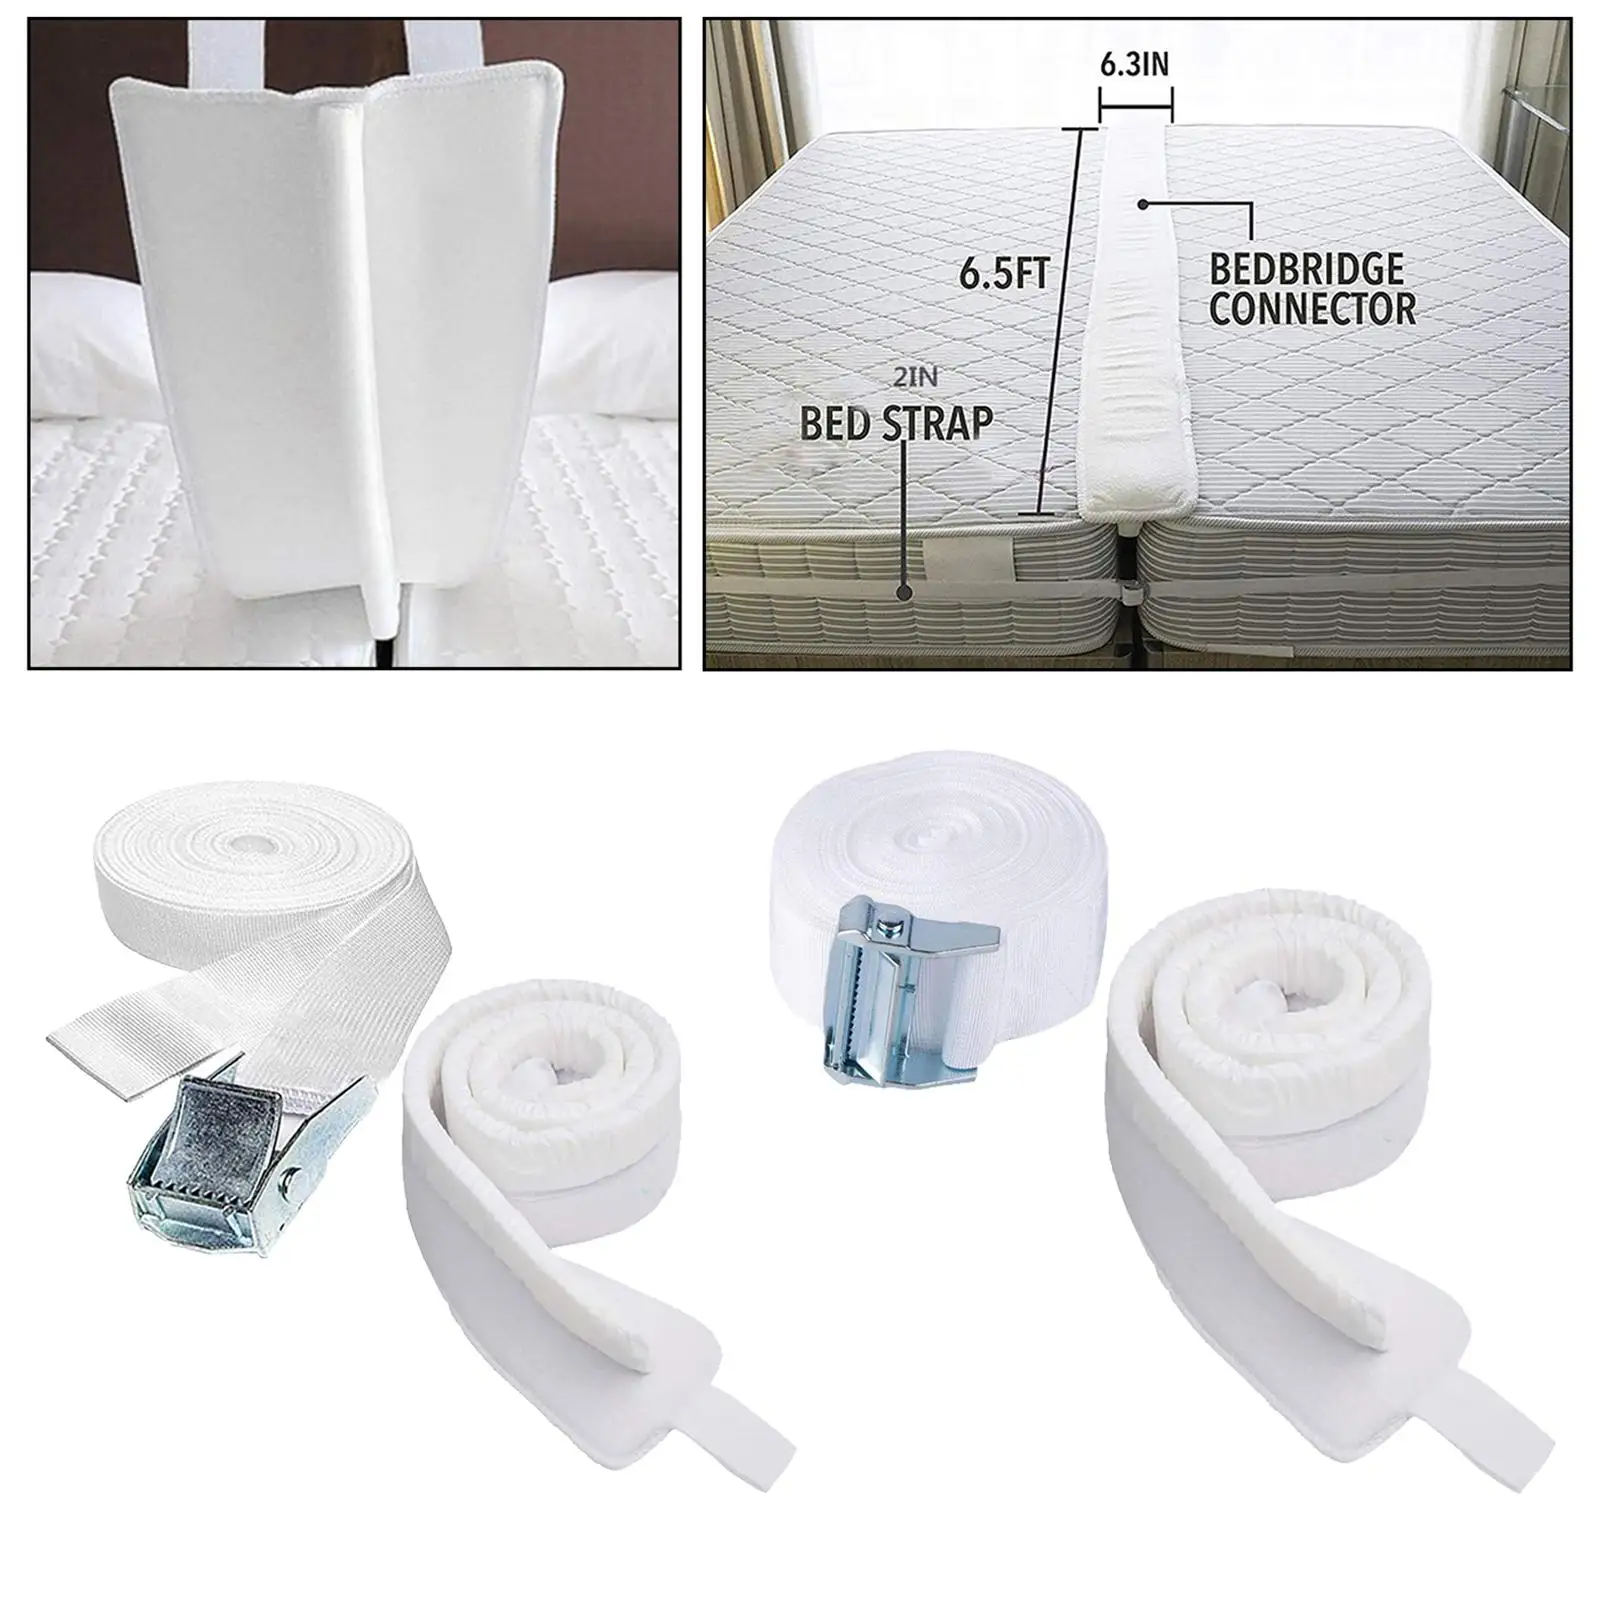 Mattress Connector Adjustable Twin to King Converter Kit   Room Home